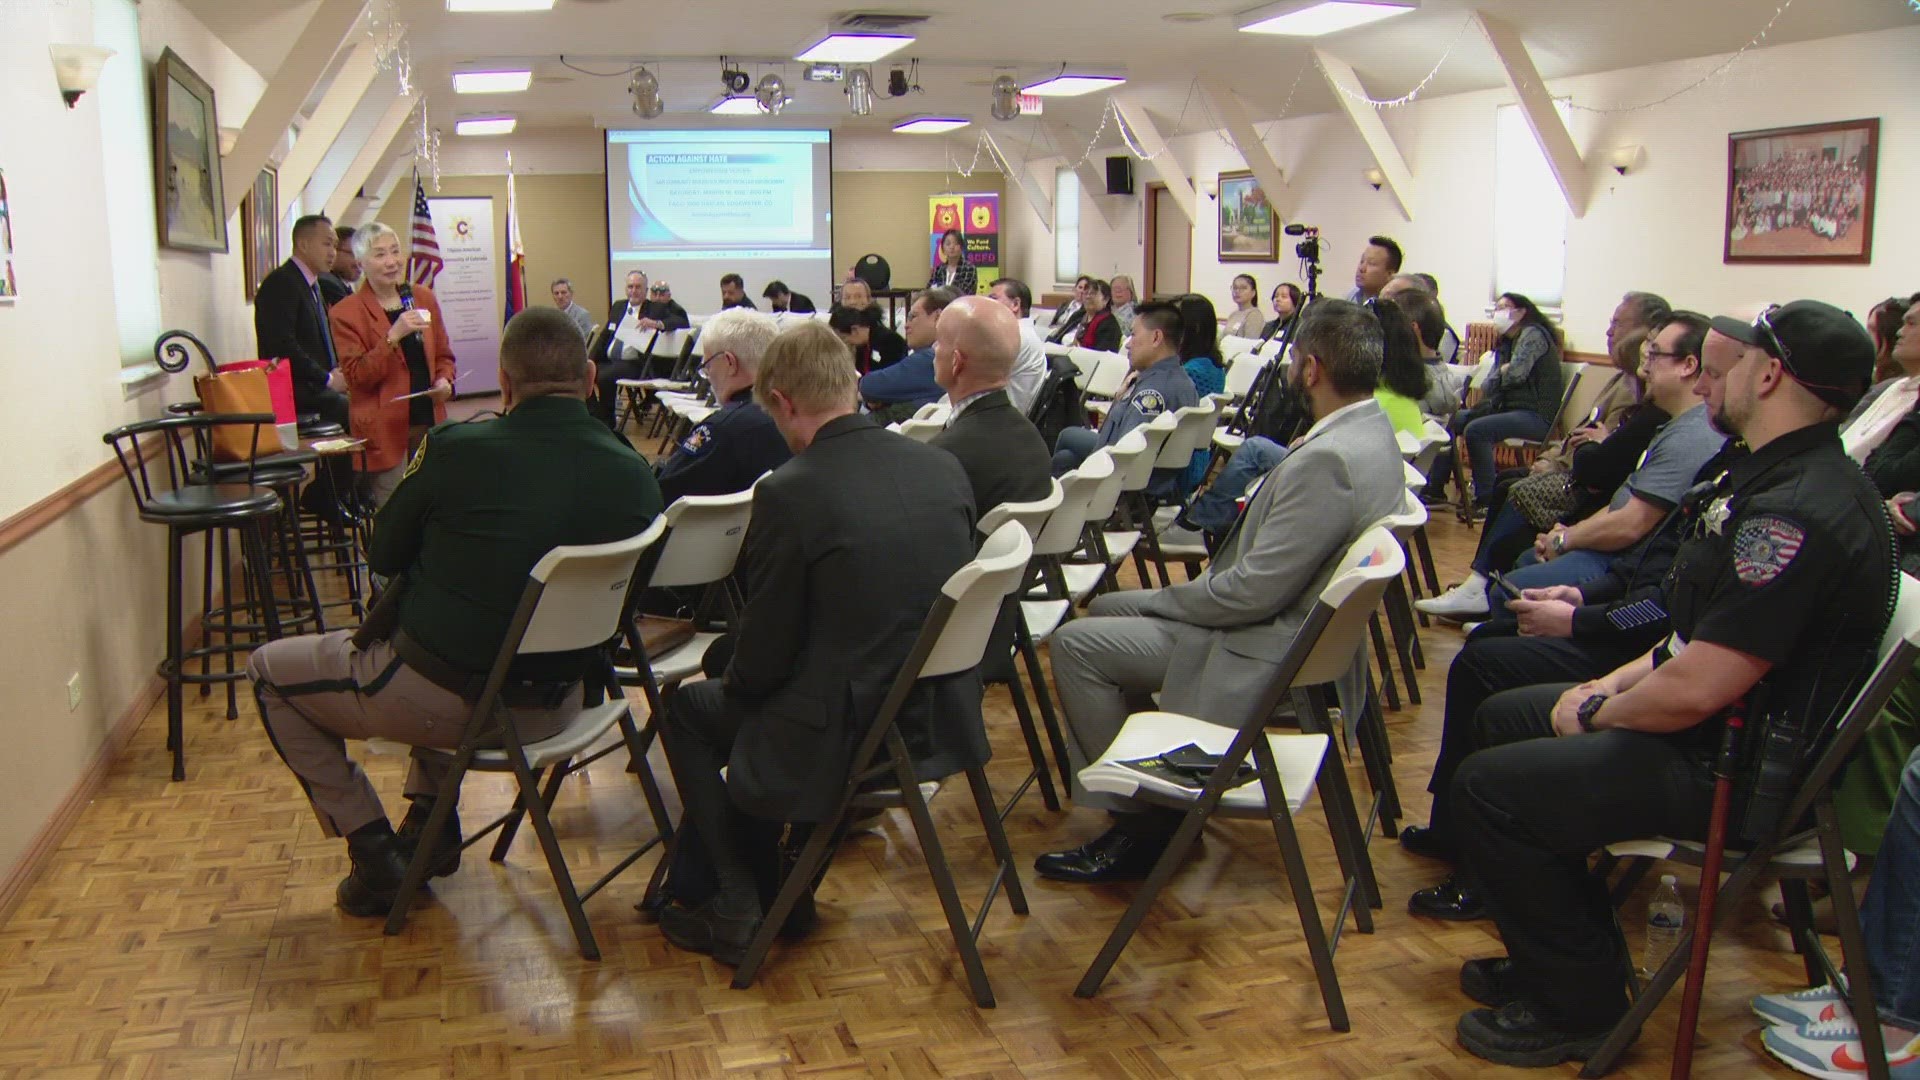 The Asian Roundtable of Colorado and Action Against Hate hosted a townhall Saturday to encourage conversations between the community and police.